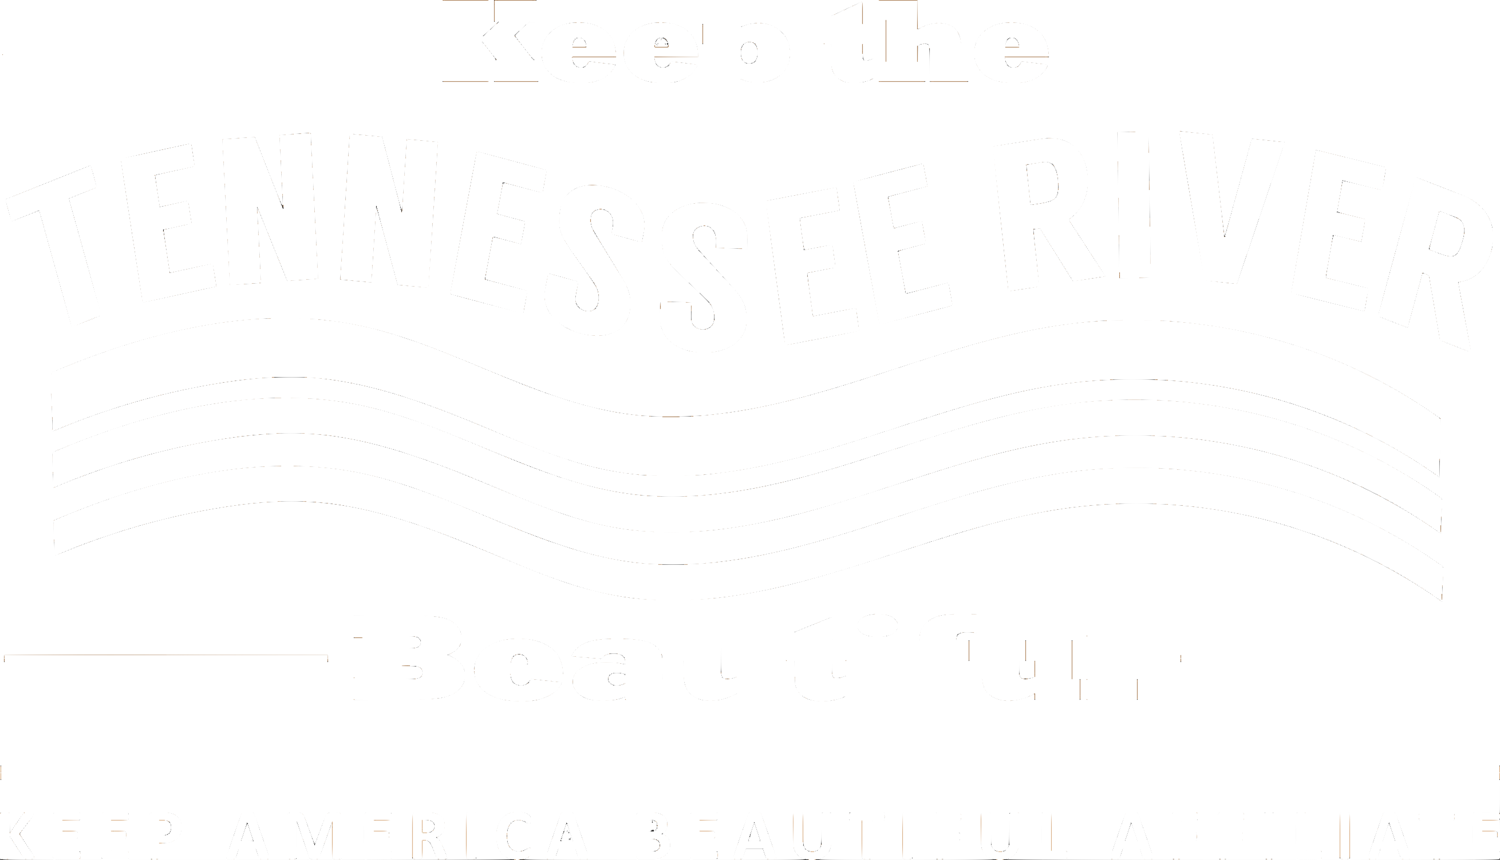 Keep the Tennessee River Beautiful